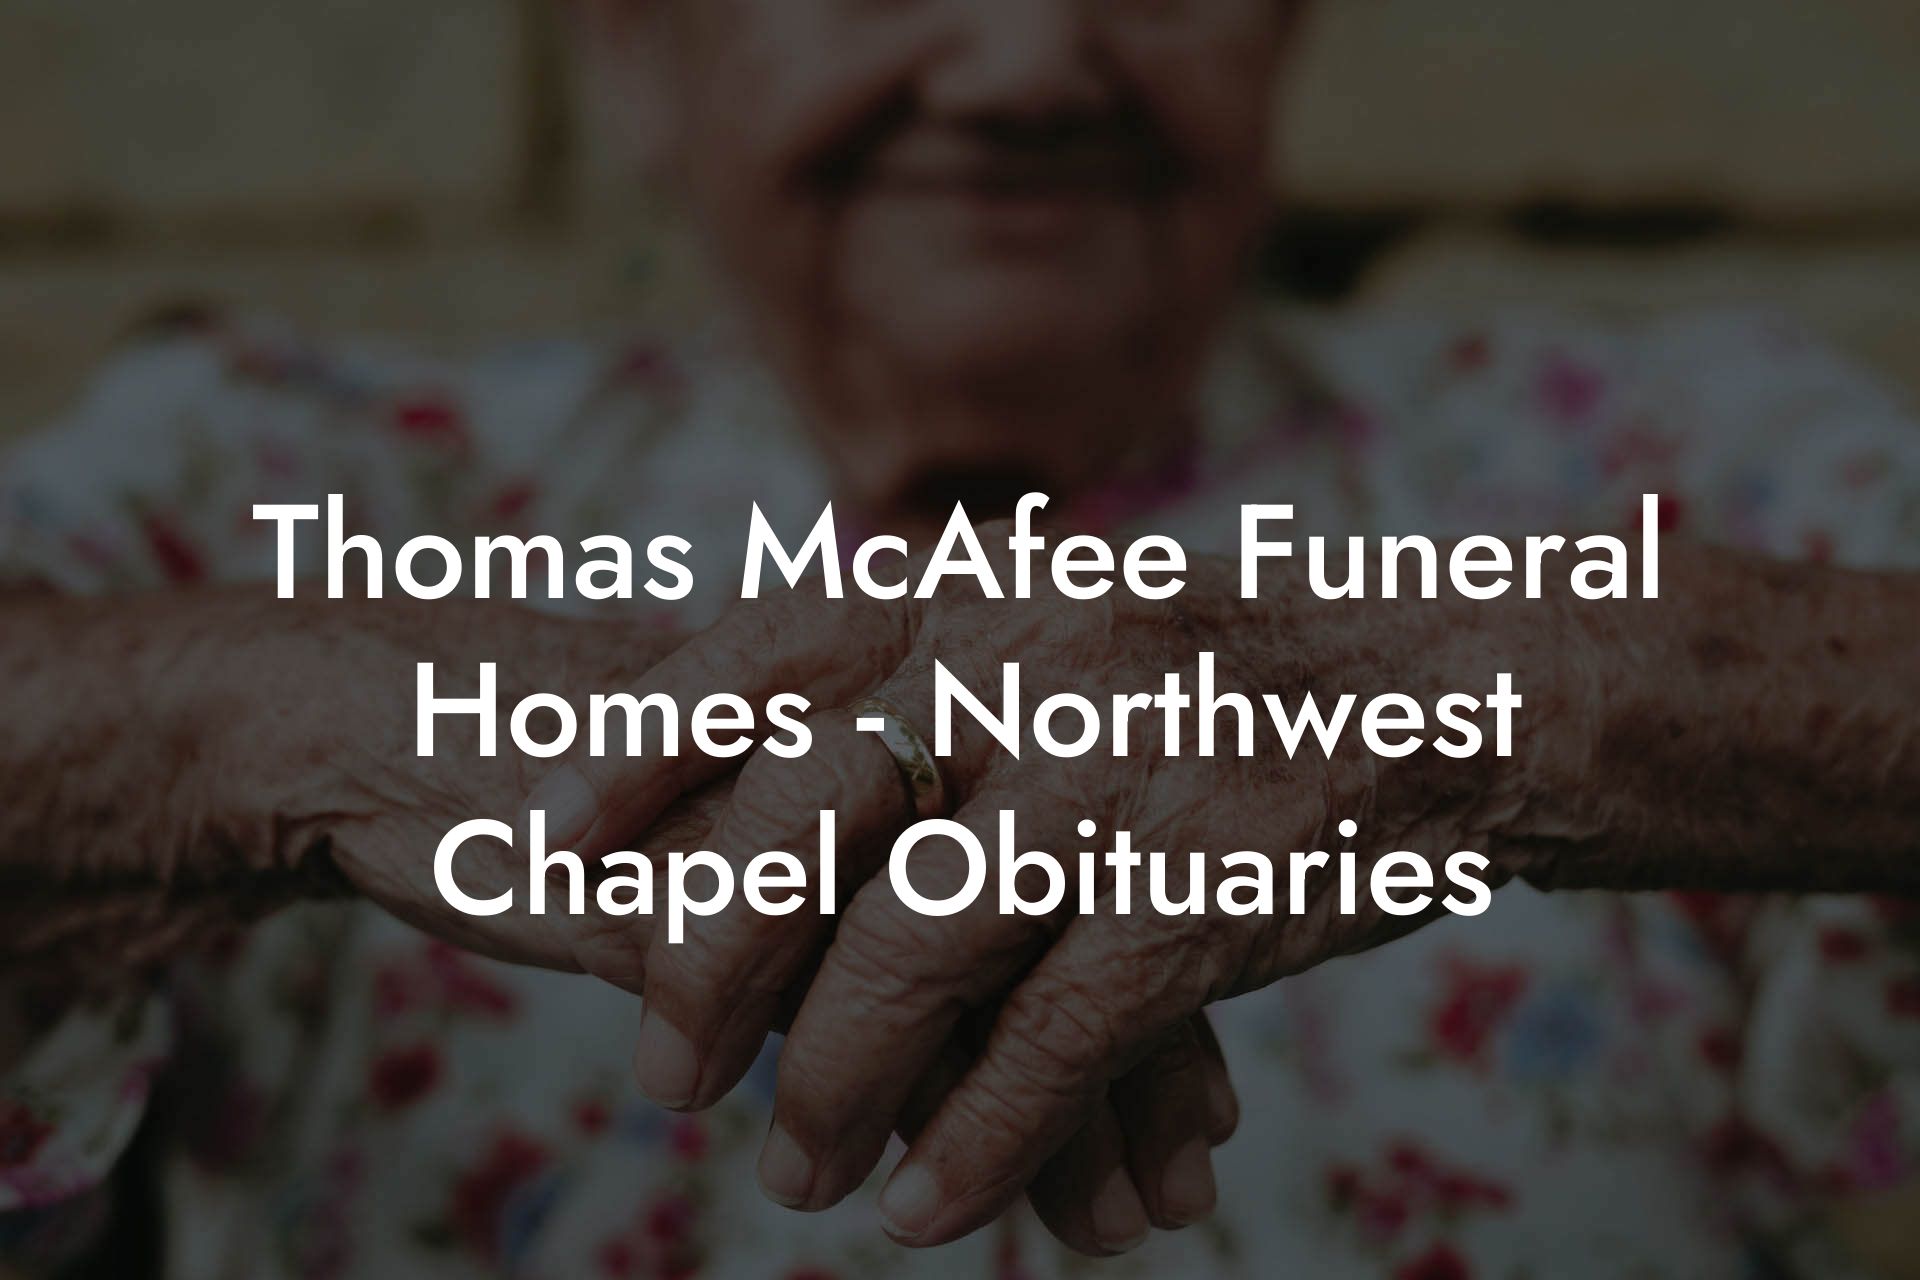 Thomas McAfee Funeral Homes Northwest Chapel Obituaries